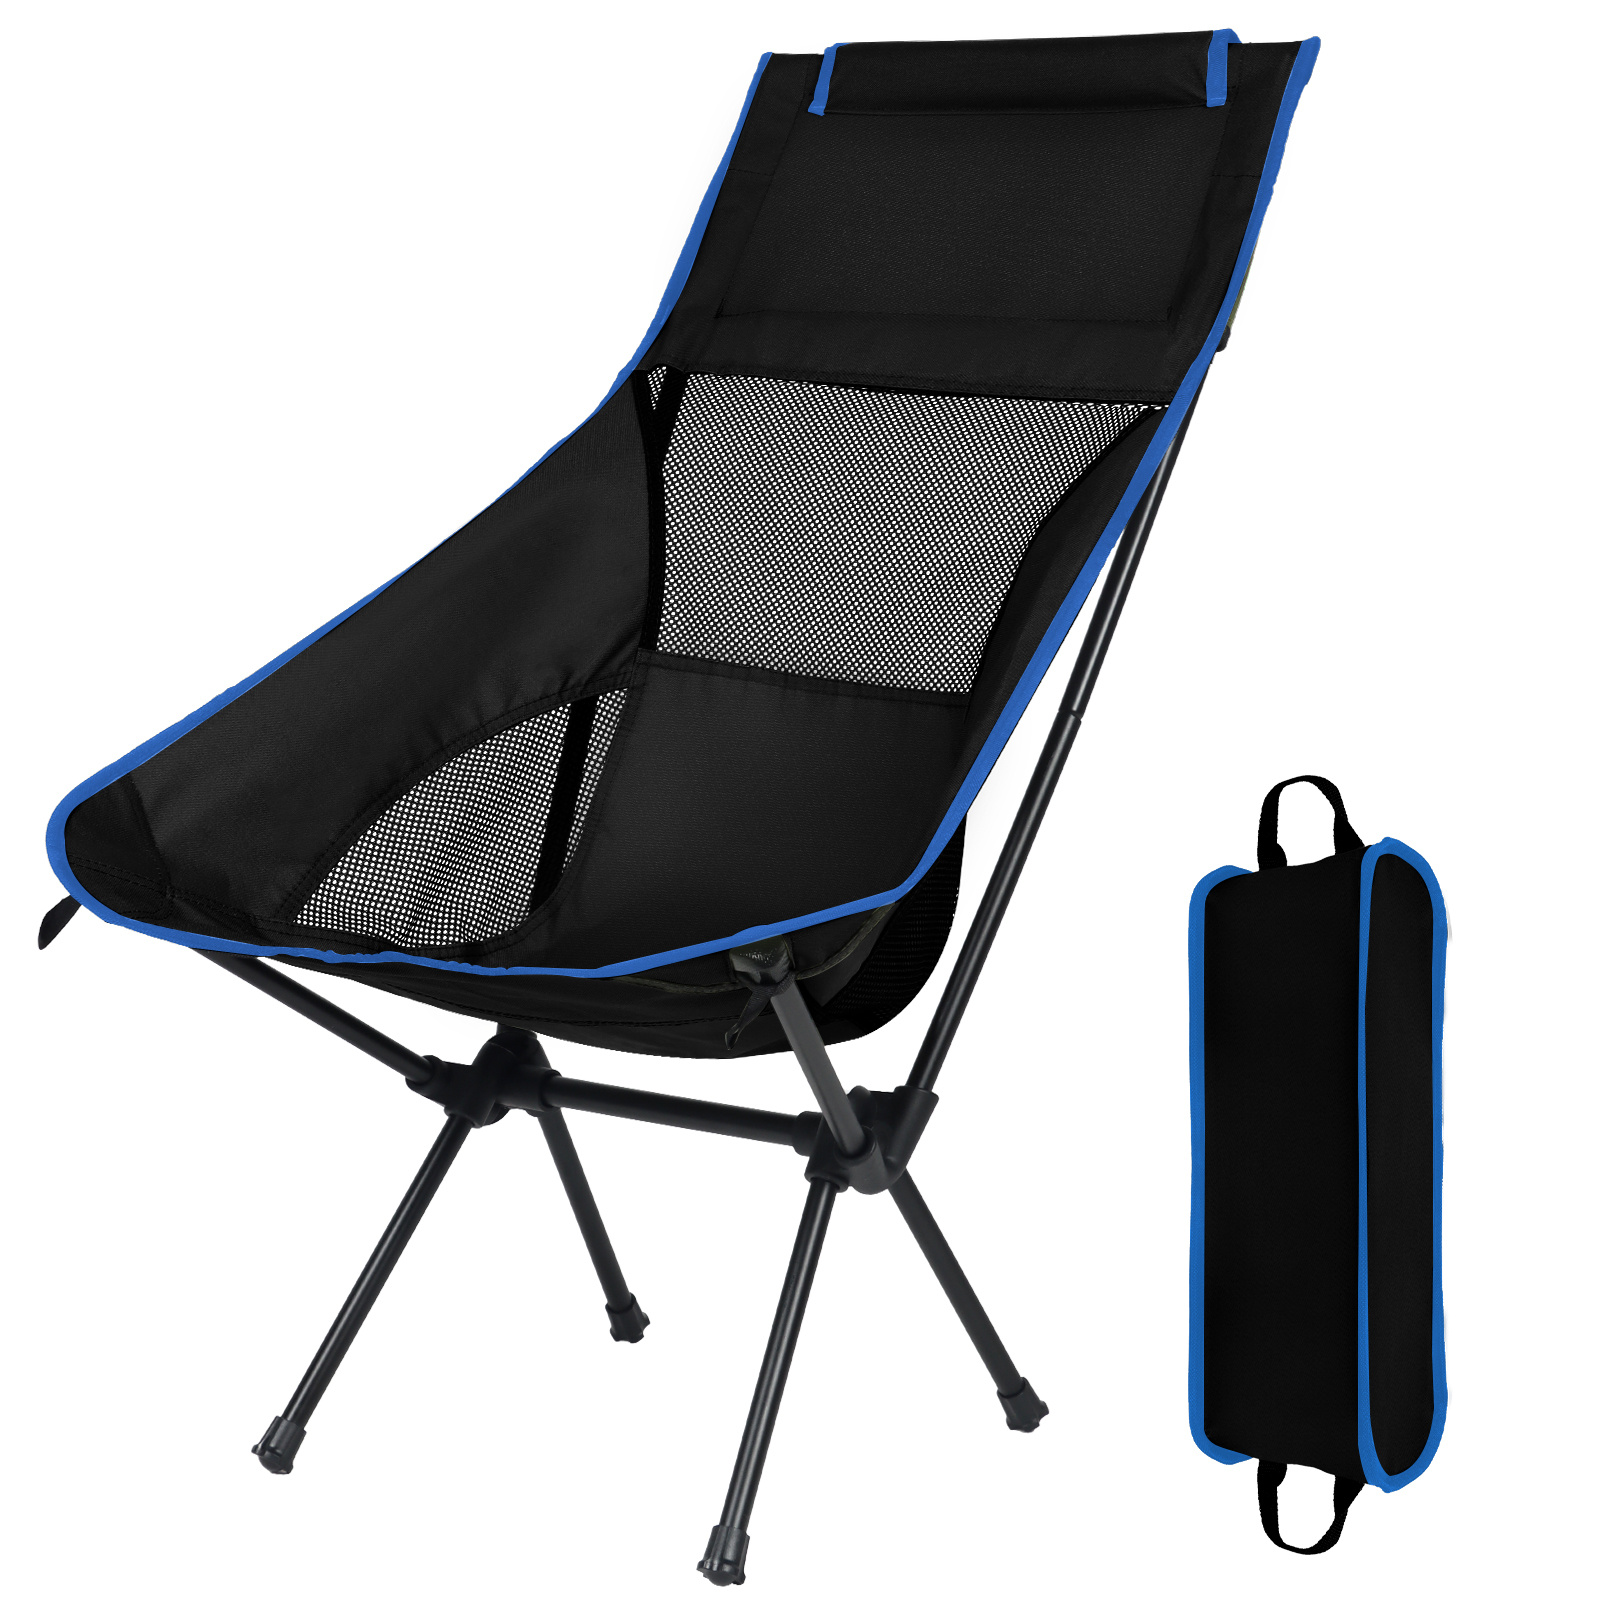 Lightweight Camping Chairs for Adults, Outdoor Folding Chair, Camp Chair Foldable Garden Chairs Picnic Chair Foldable Chair, Portable Fishing Chairs